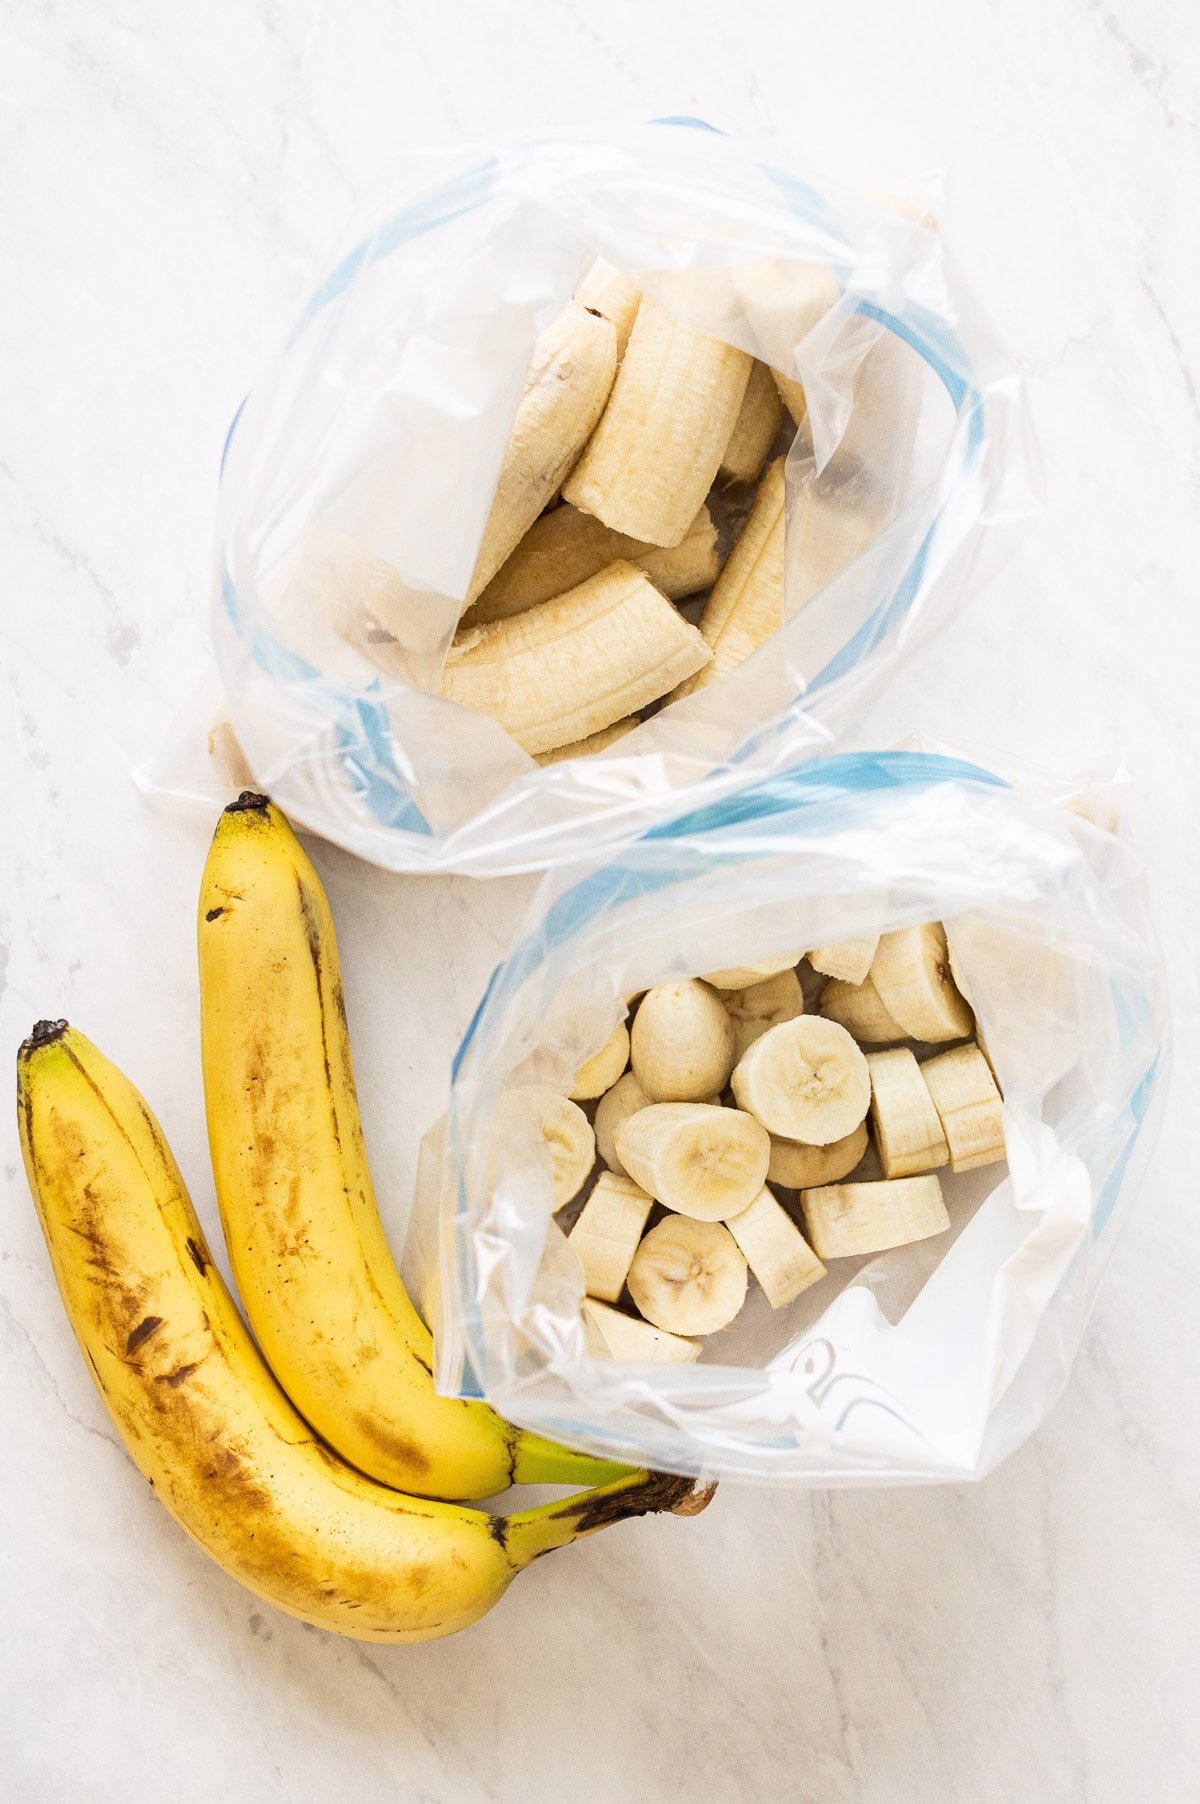 Sliced and half frozen bananas in resealable bags. Two ripe bananas.